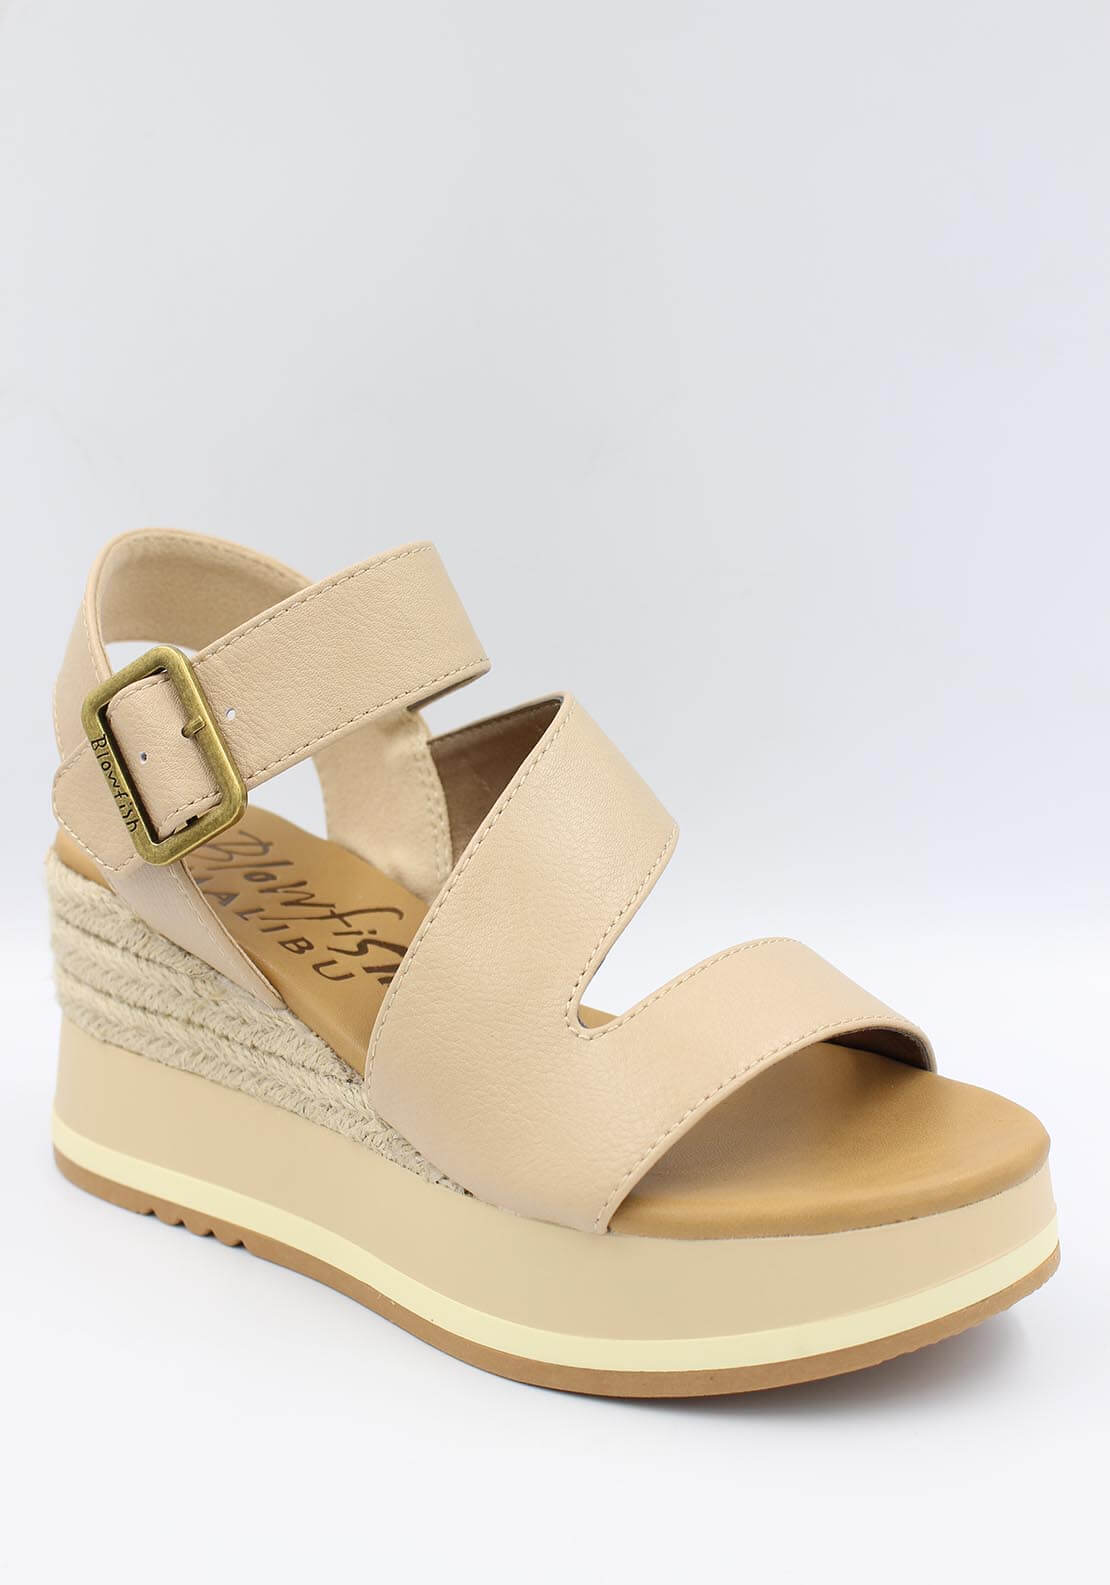 Blow Fish Solly Wedge Sandal 1 Shaws Department Stores